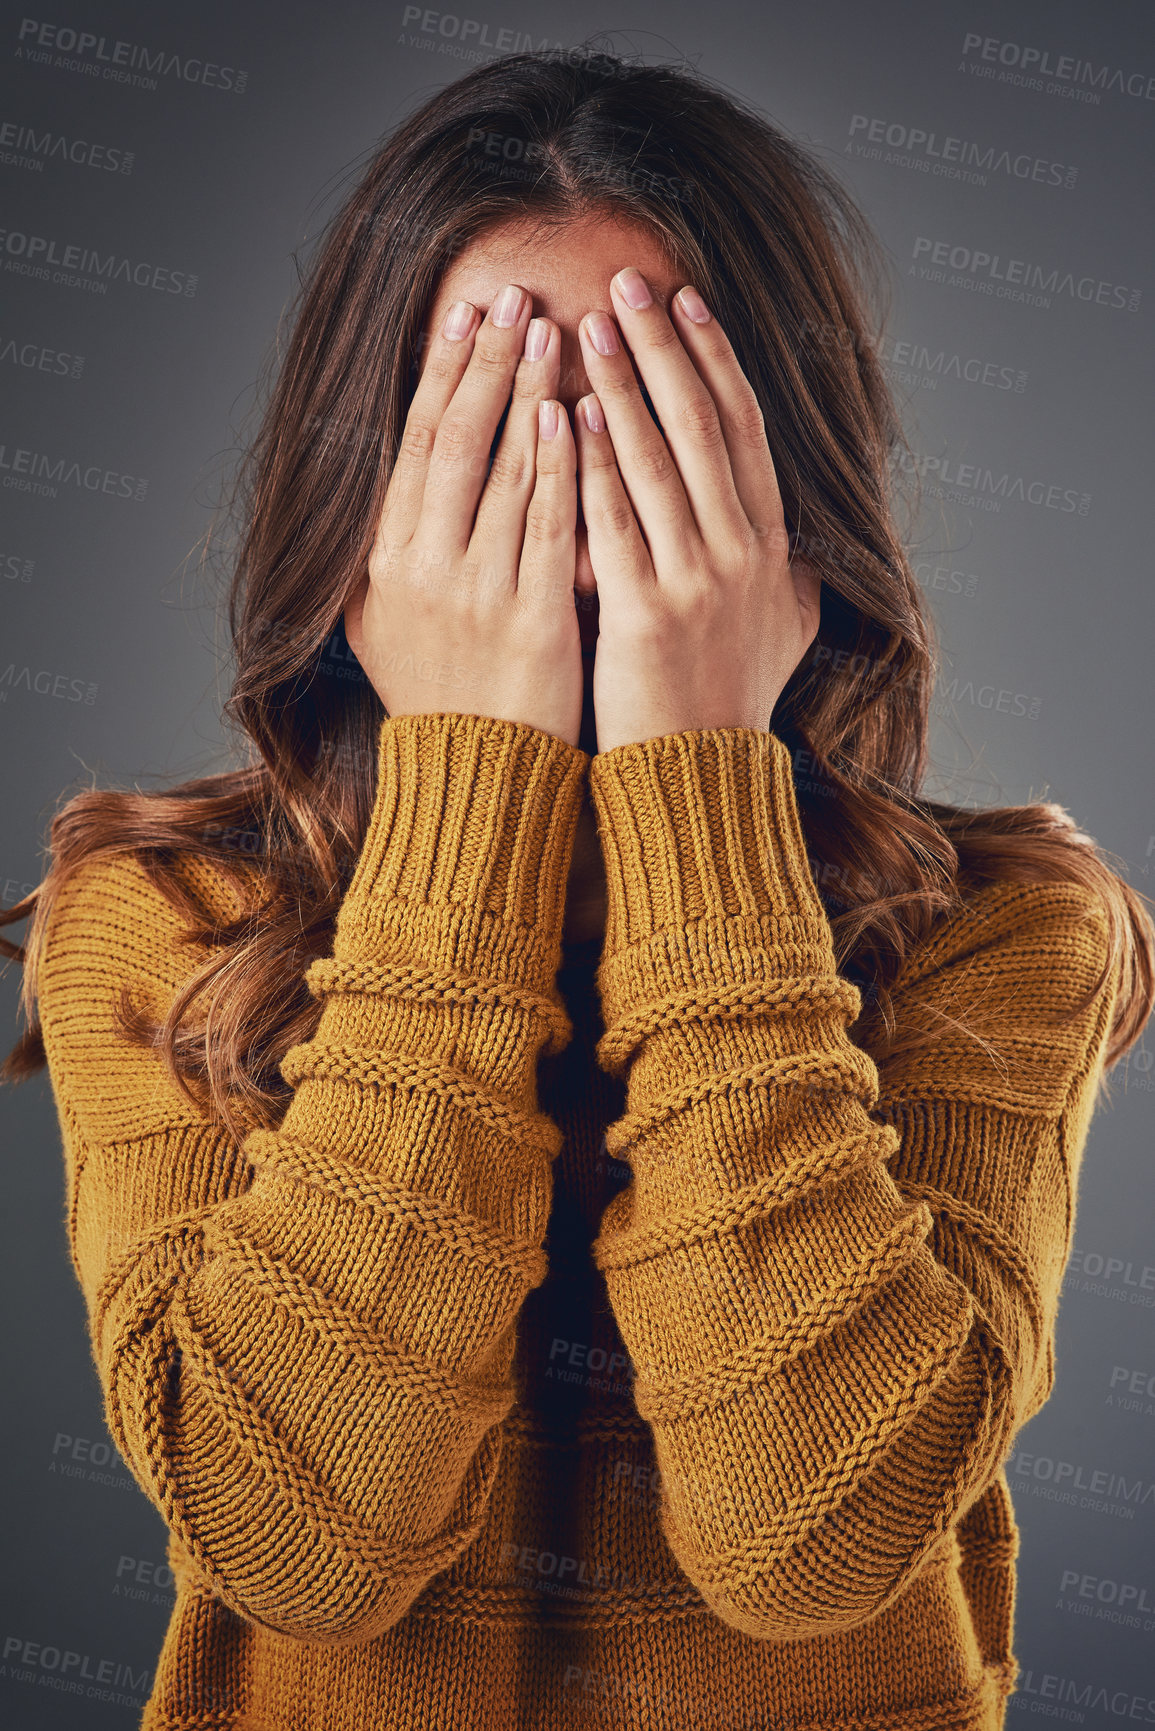 Buy stock photo Studio shot of a young woman covering her face against a grey background